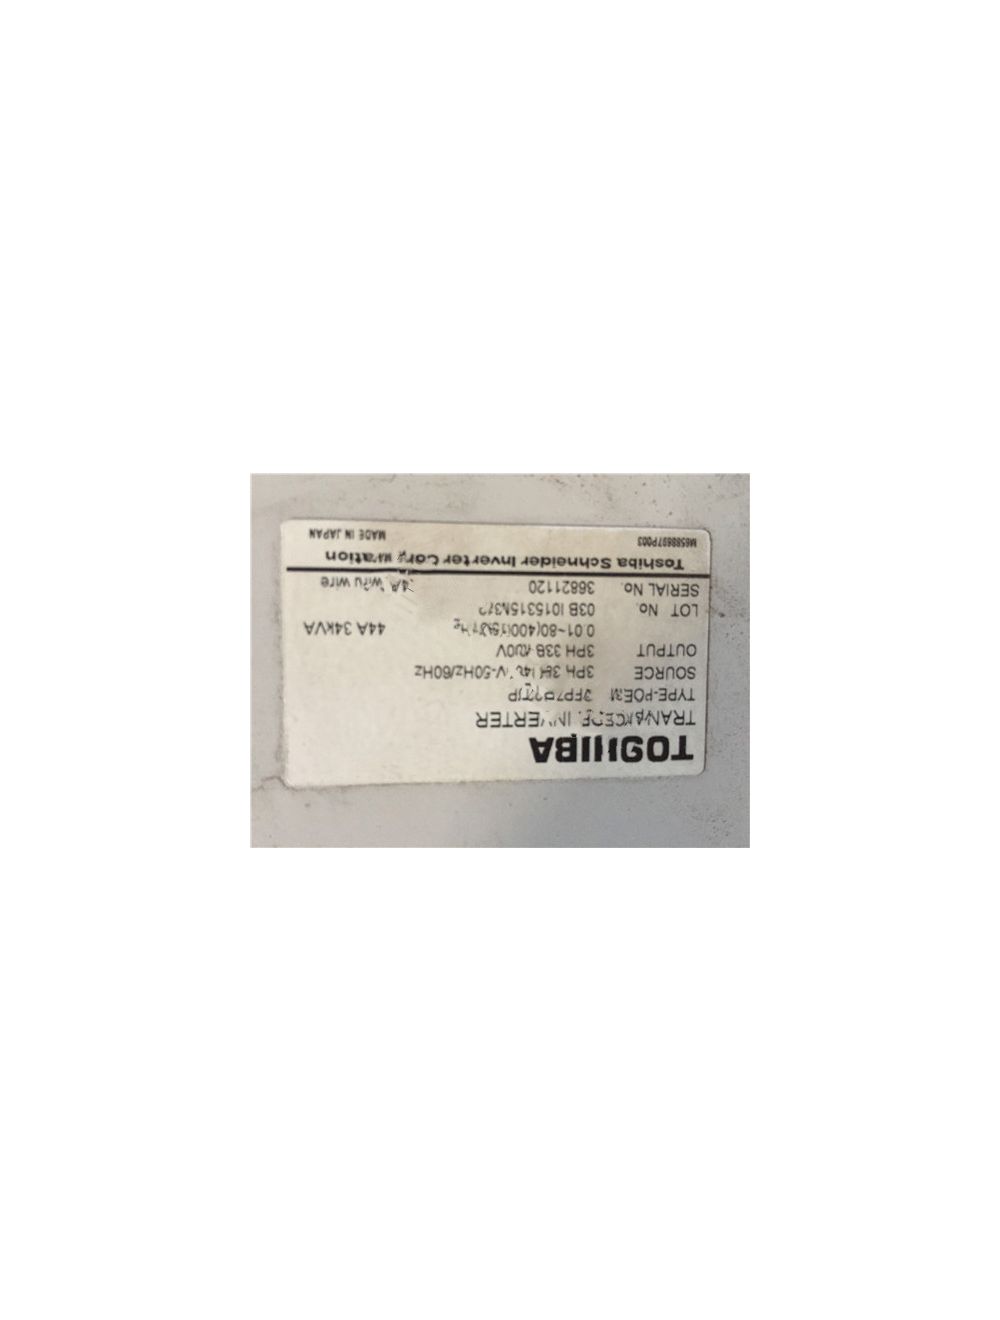 New In stock for sale, Toshiba VFD Frequency Converter VFP7-4220P